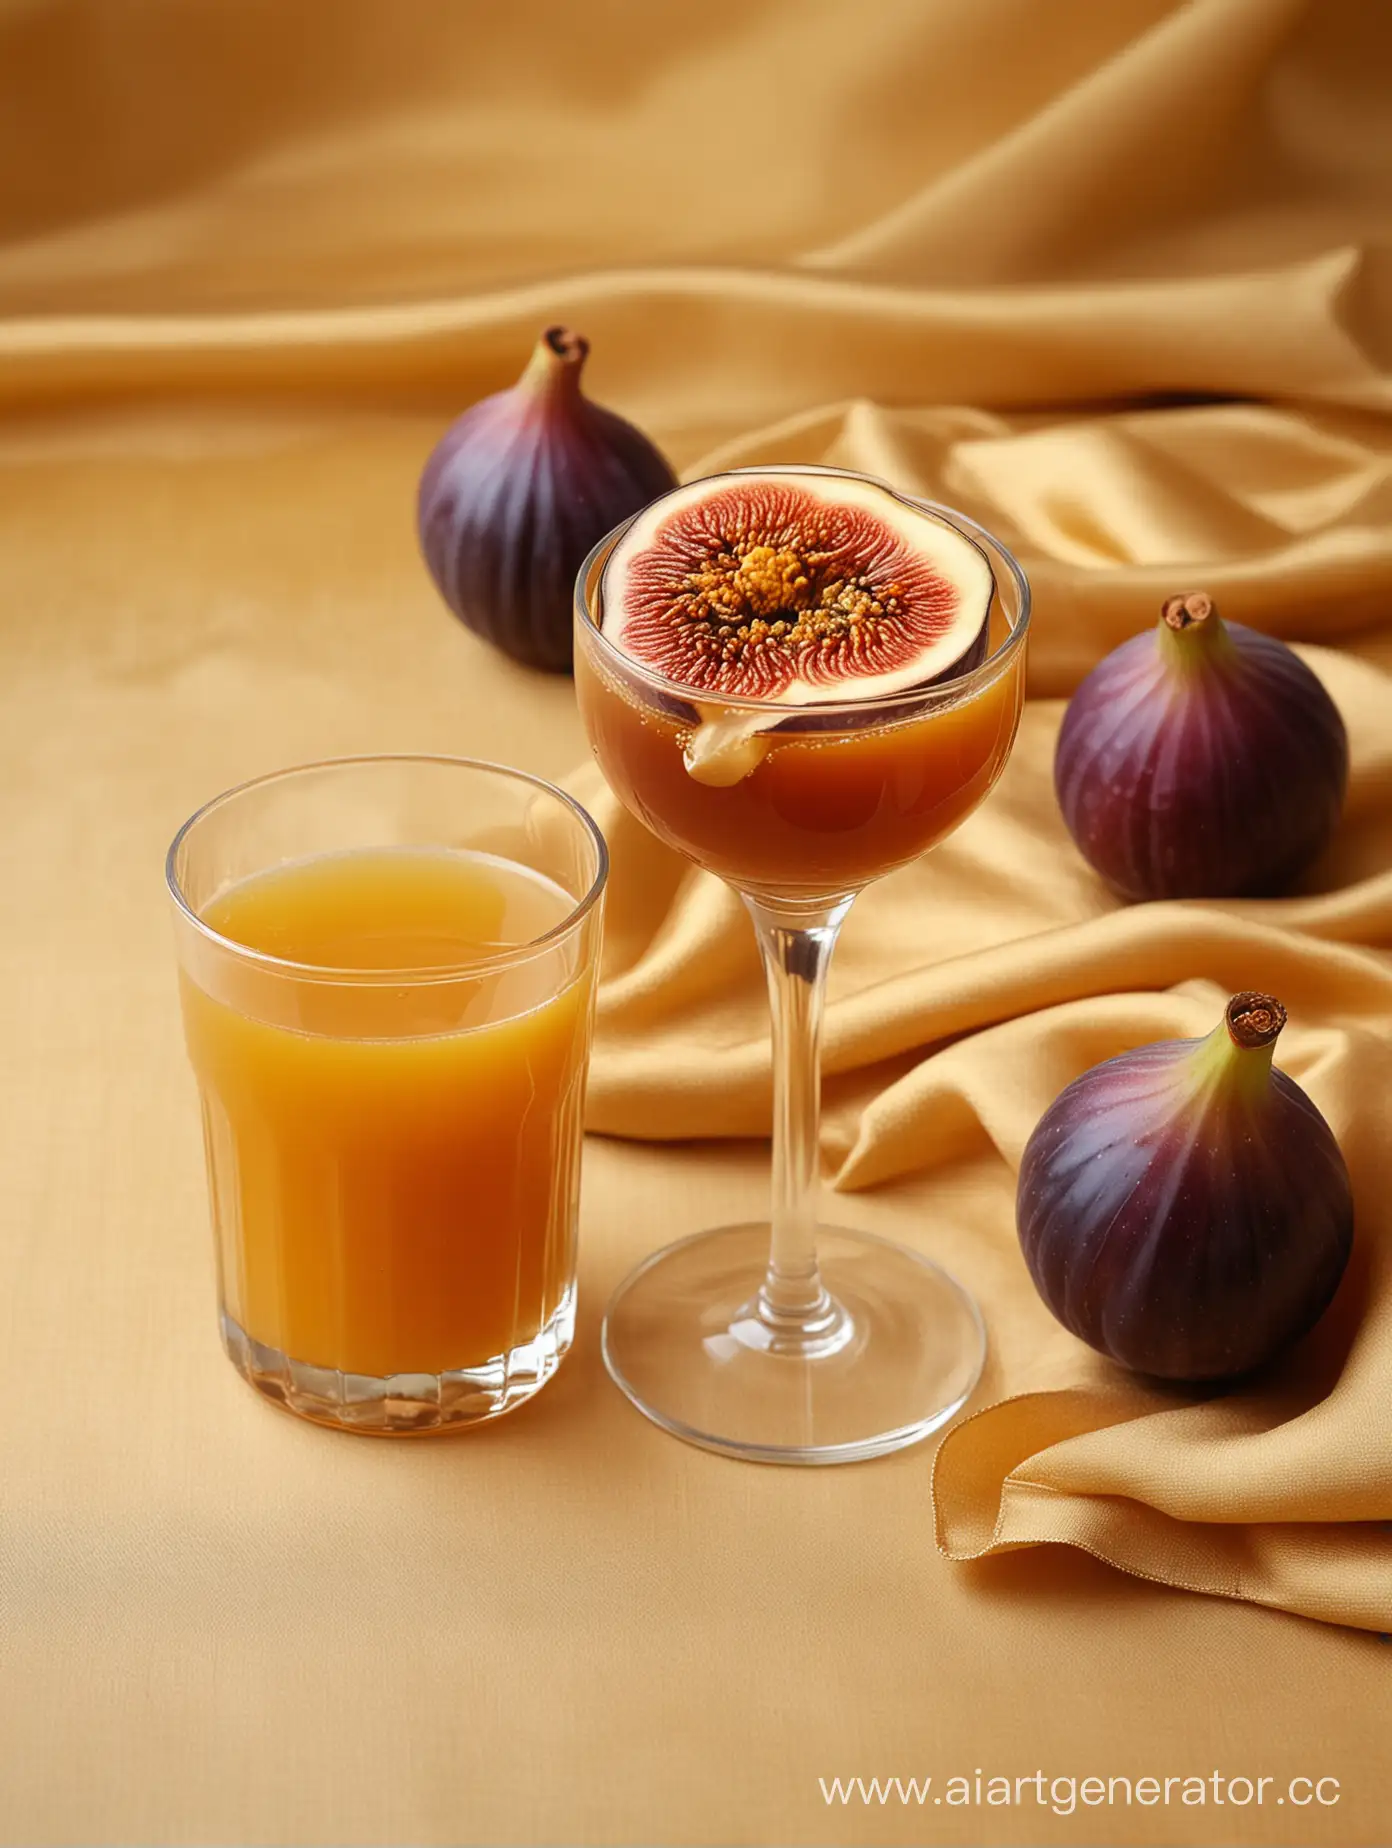 Fig-with-Juice-in-Classic-Glass-on-Golden-Silk-Cloth-Background